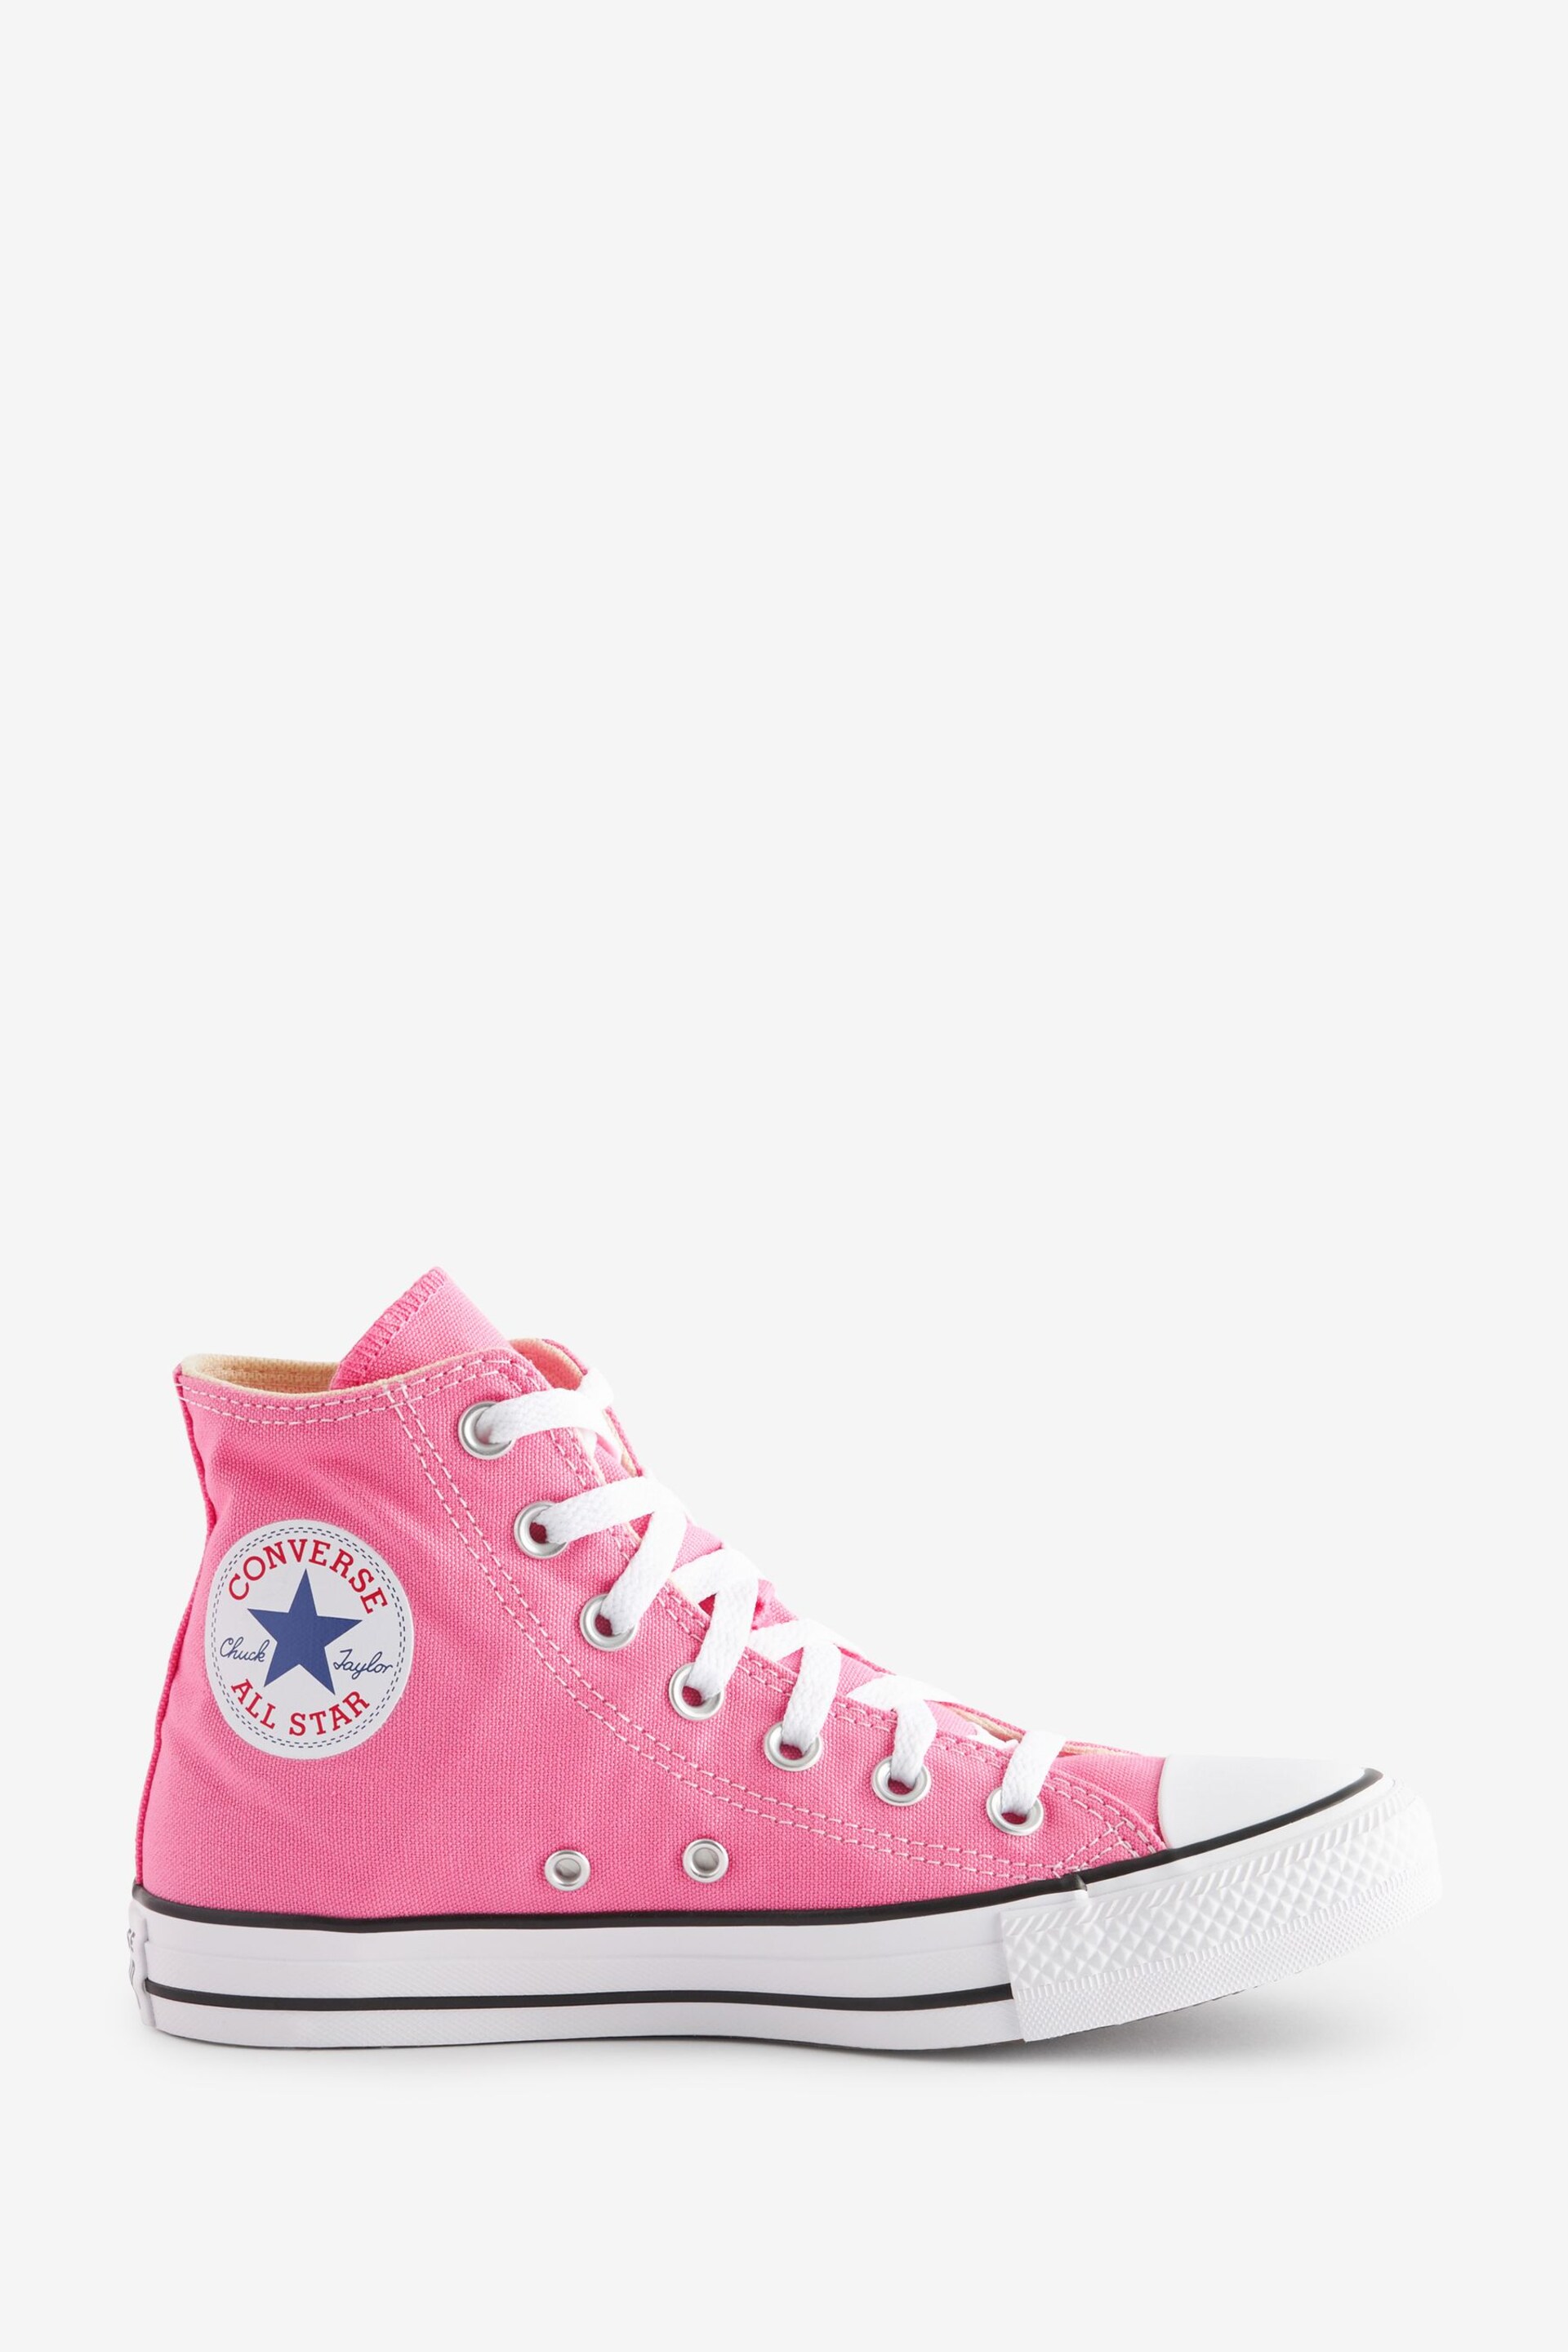 Converse Pink Chuck Taylor All Star Trainers - Image 1 of 6